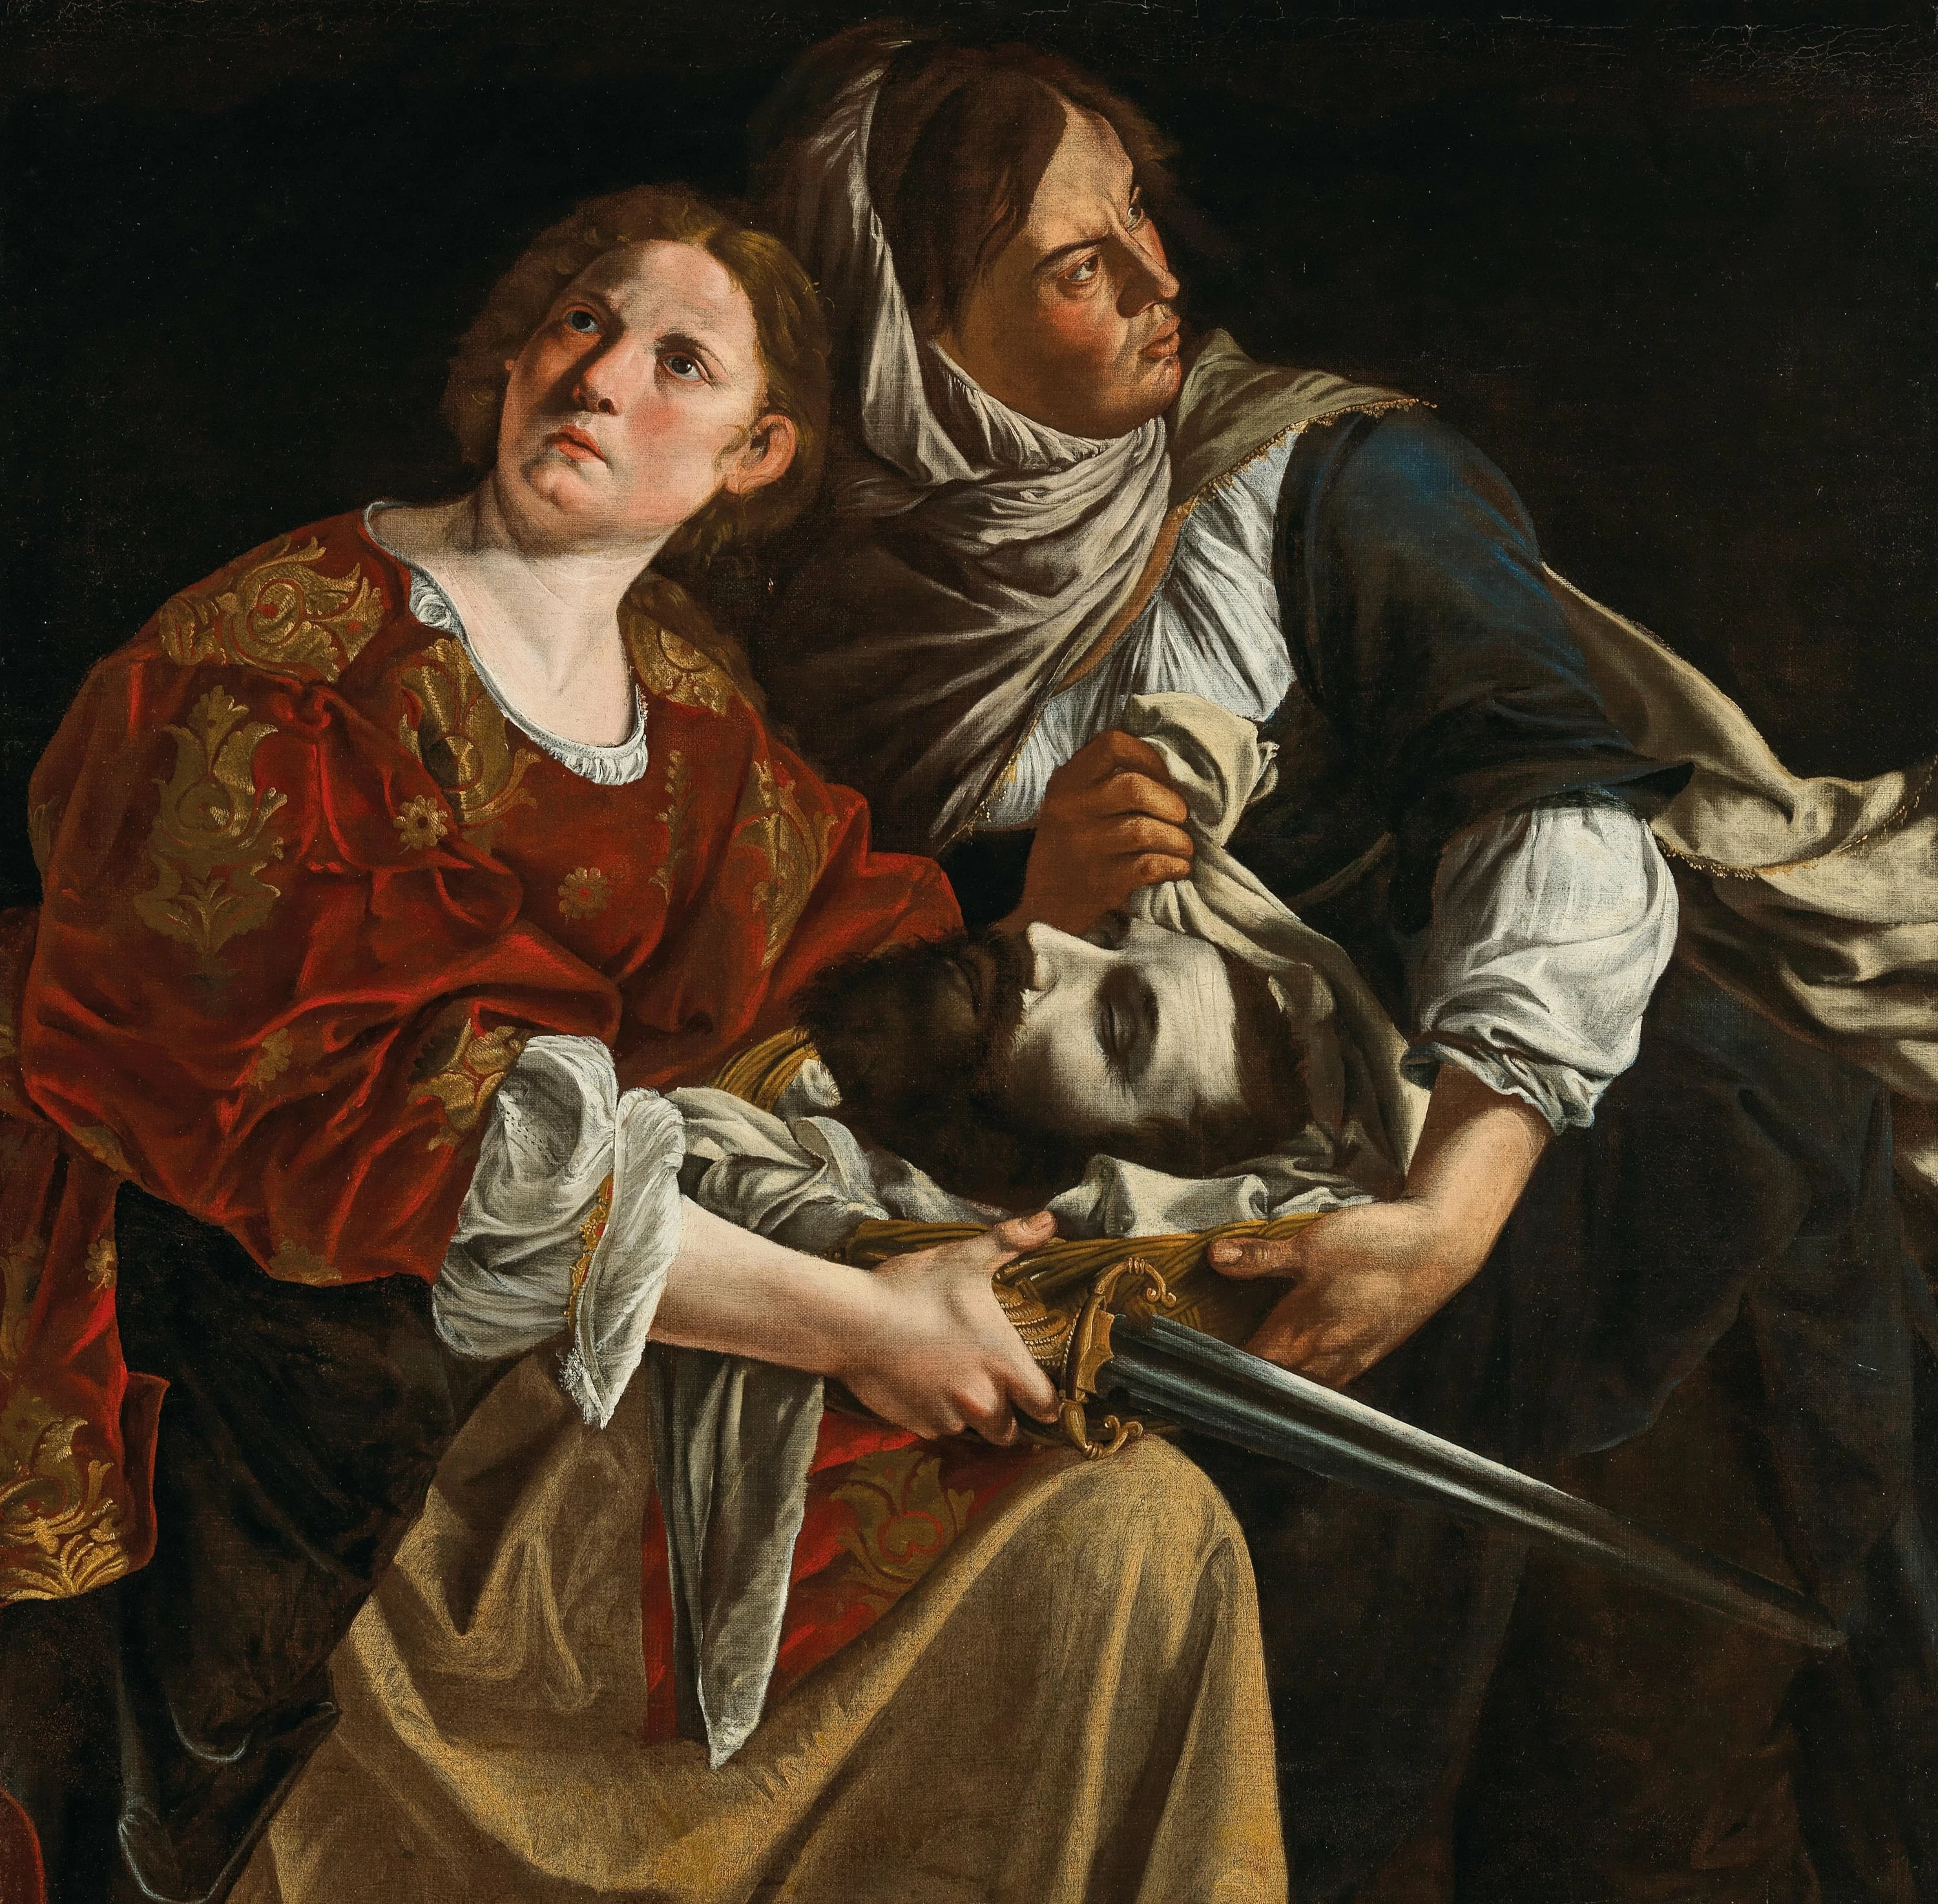 Judith and Her Maidservant with the Head of Holofernes, Artemisia Gentileschi